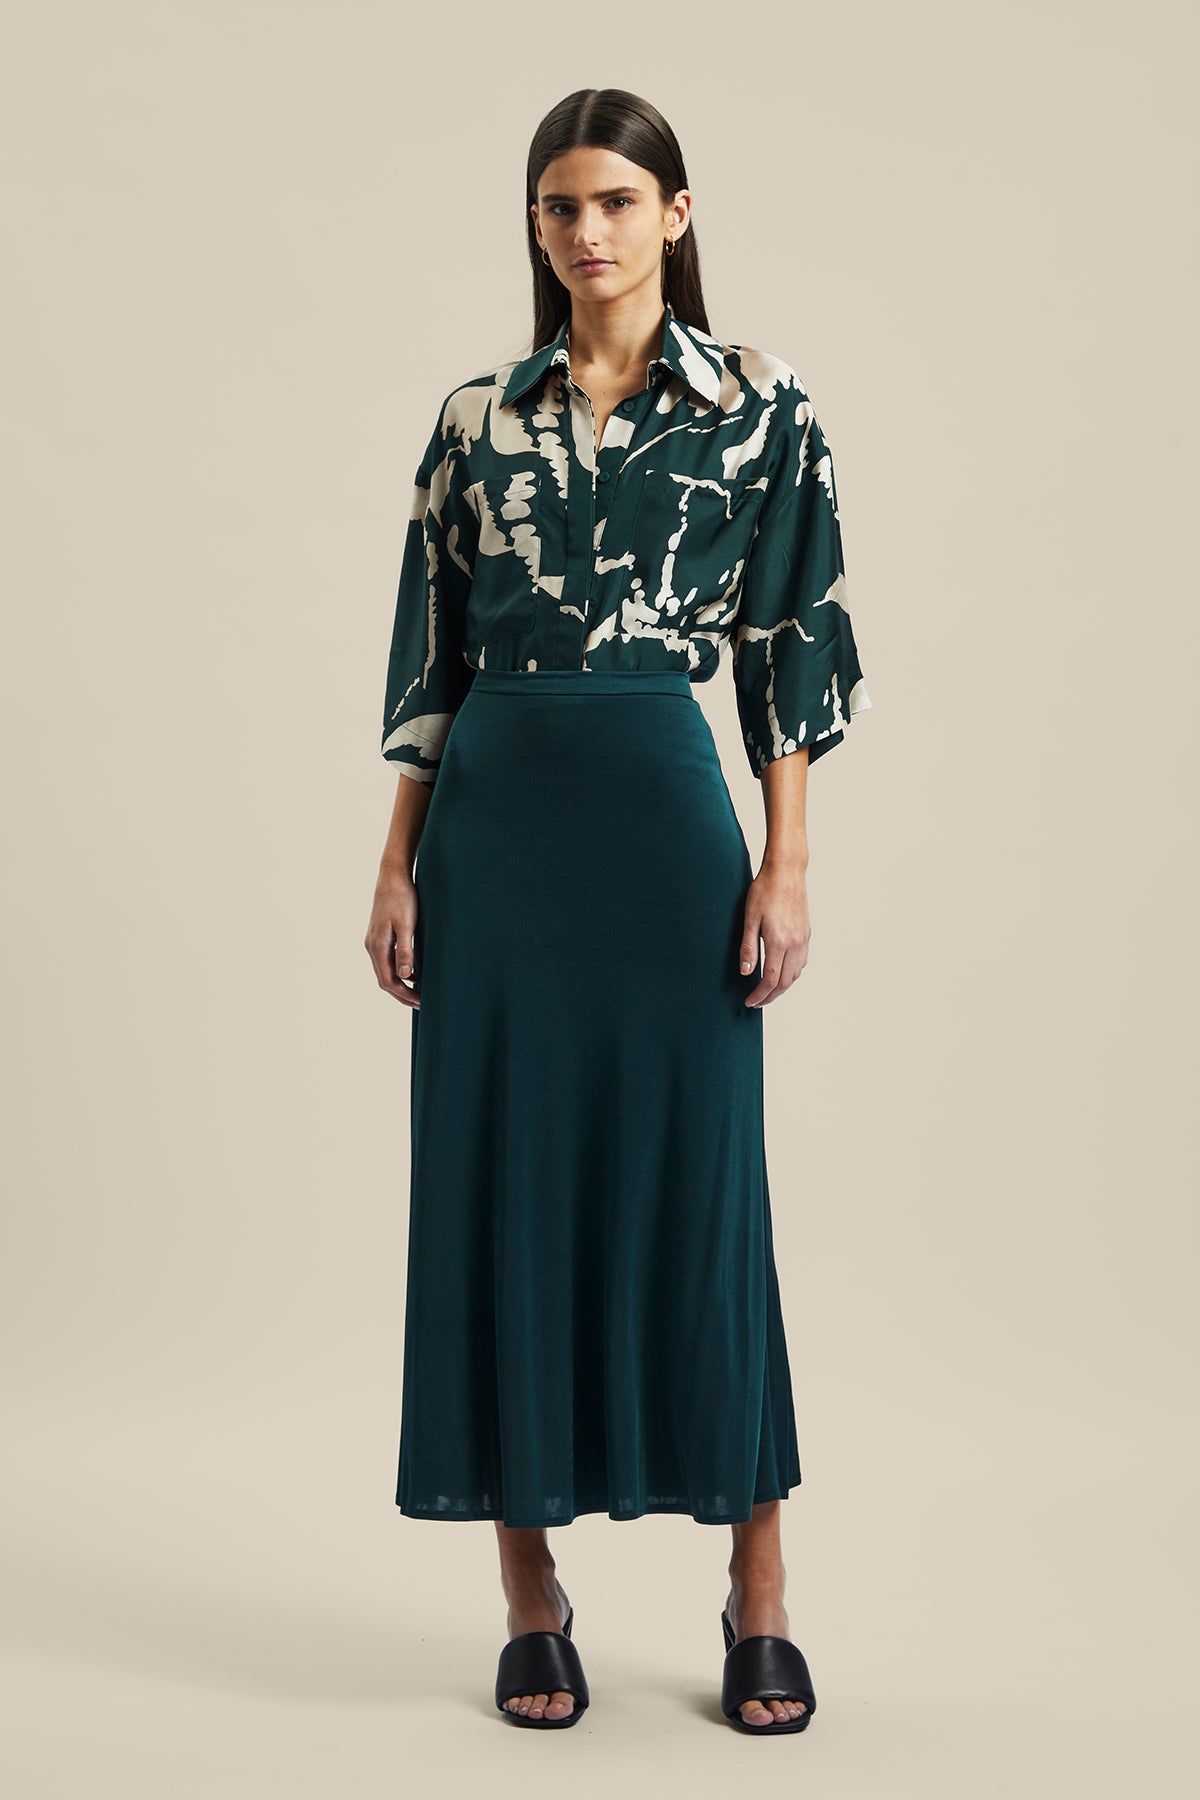 Model wearing the forest green silk Coalesce Skirt from Australian fashion designer Ginger & Smart. Worn with the Memoirs Blouse